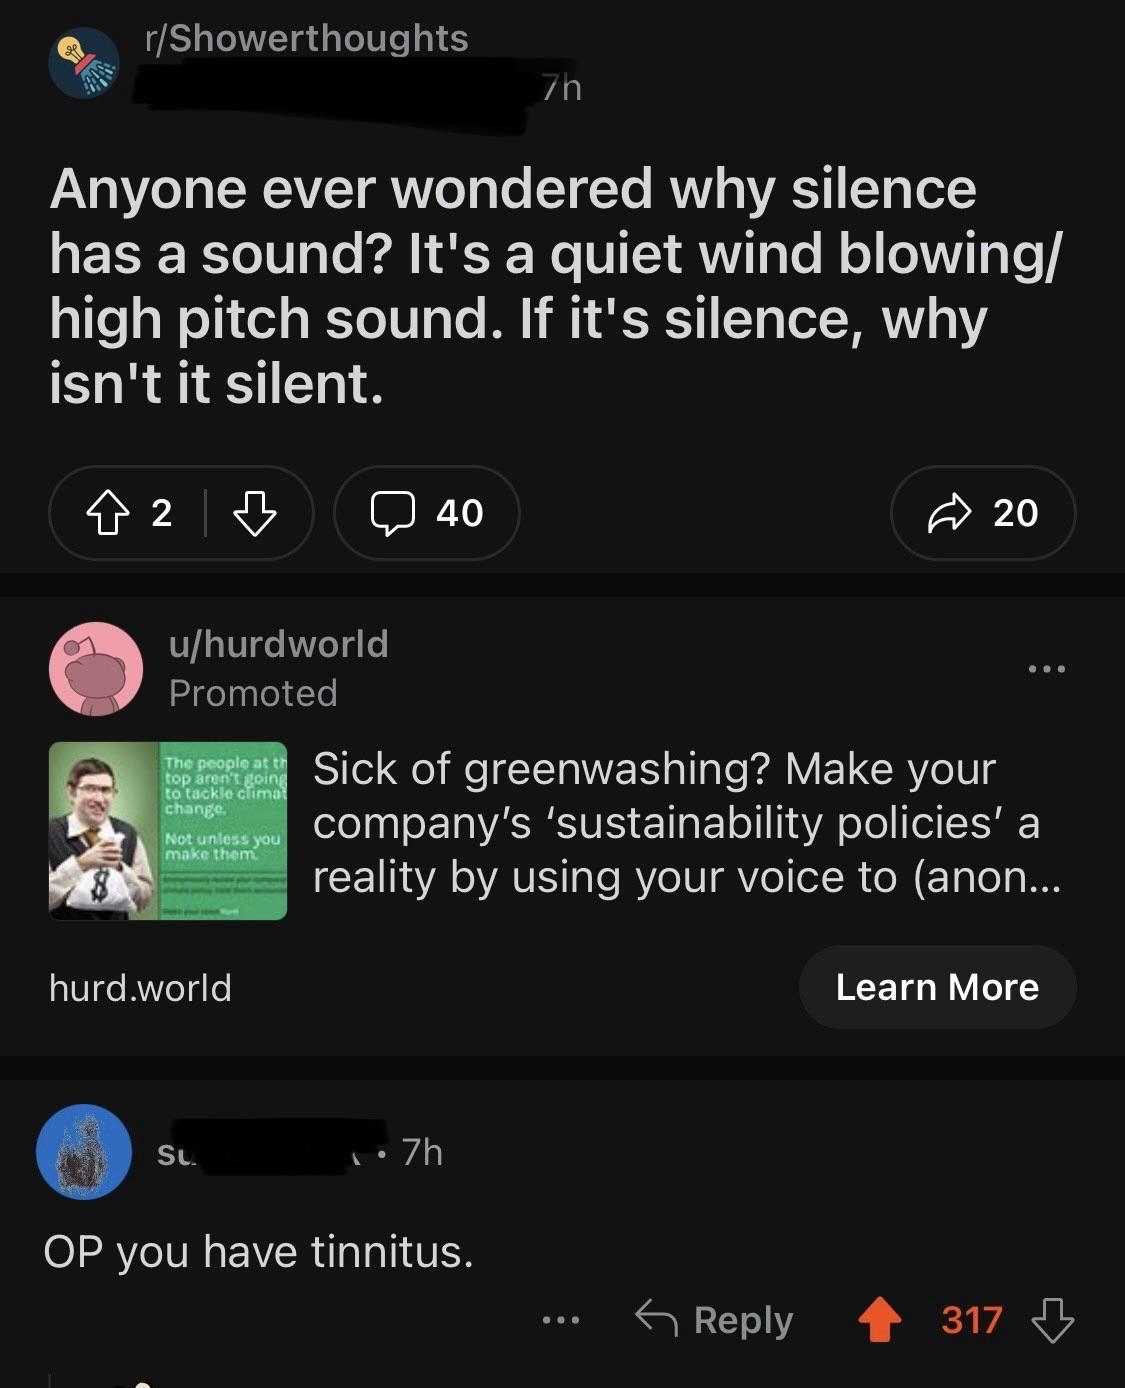 Social media message: &quot;Anyone ever wonder why silence has a sound? It&#x27;s a quiet wind blowing/high-pitch sound&quot;; response: &quot;OP you have tinnitus&quot;